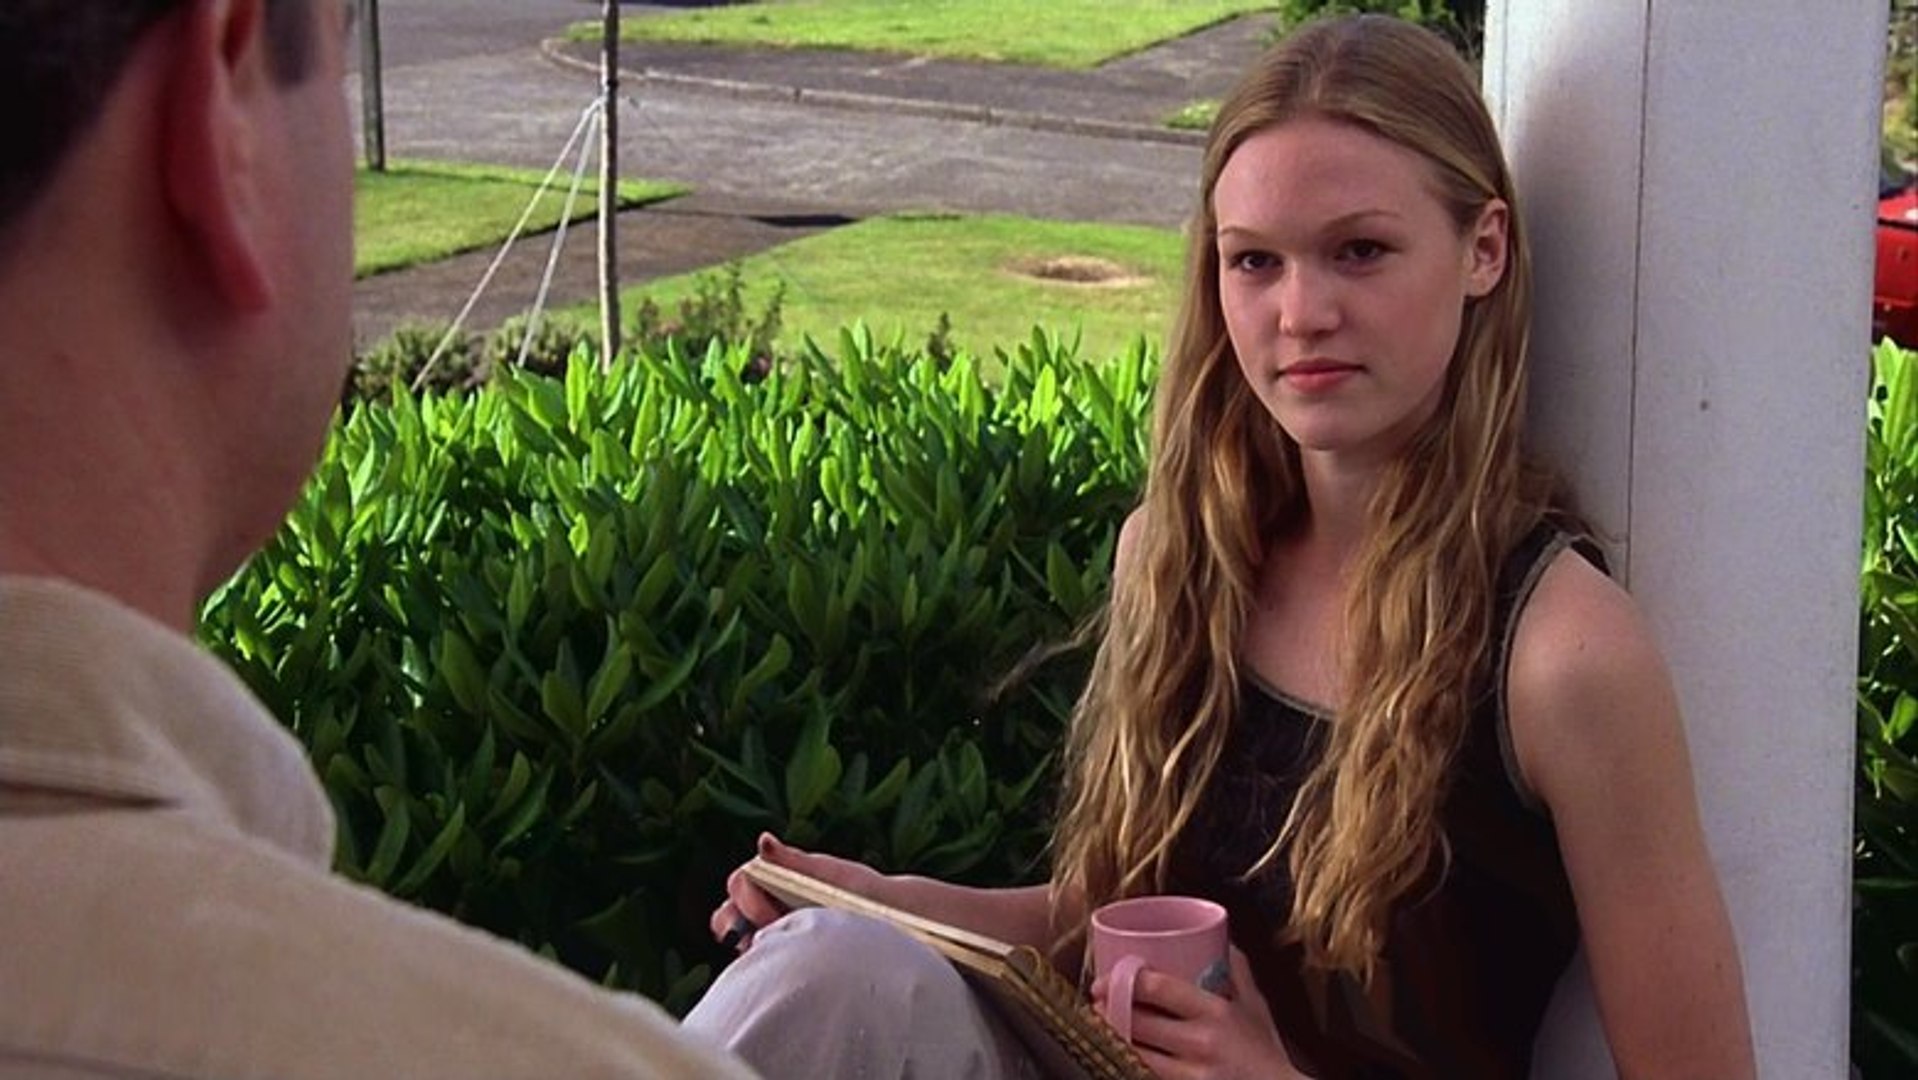 10 Things I Hate About You Official Full Length Movie - Video Dailymotion